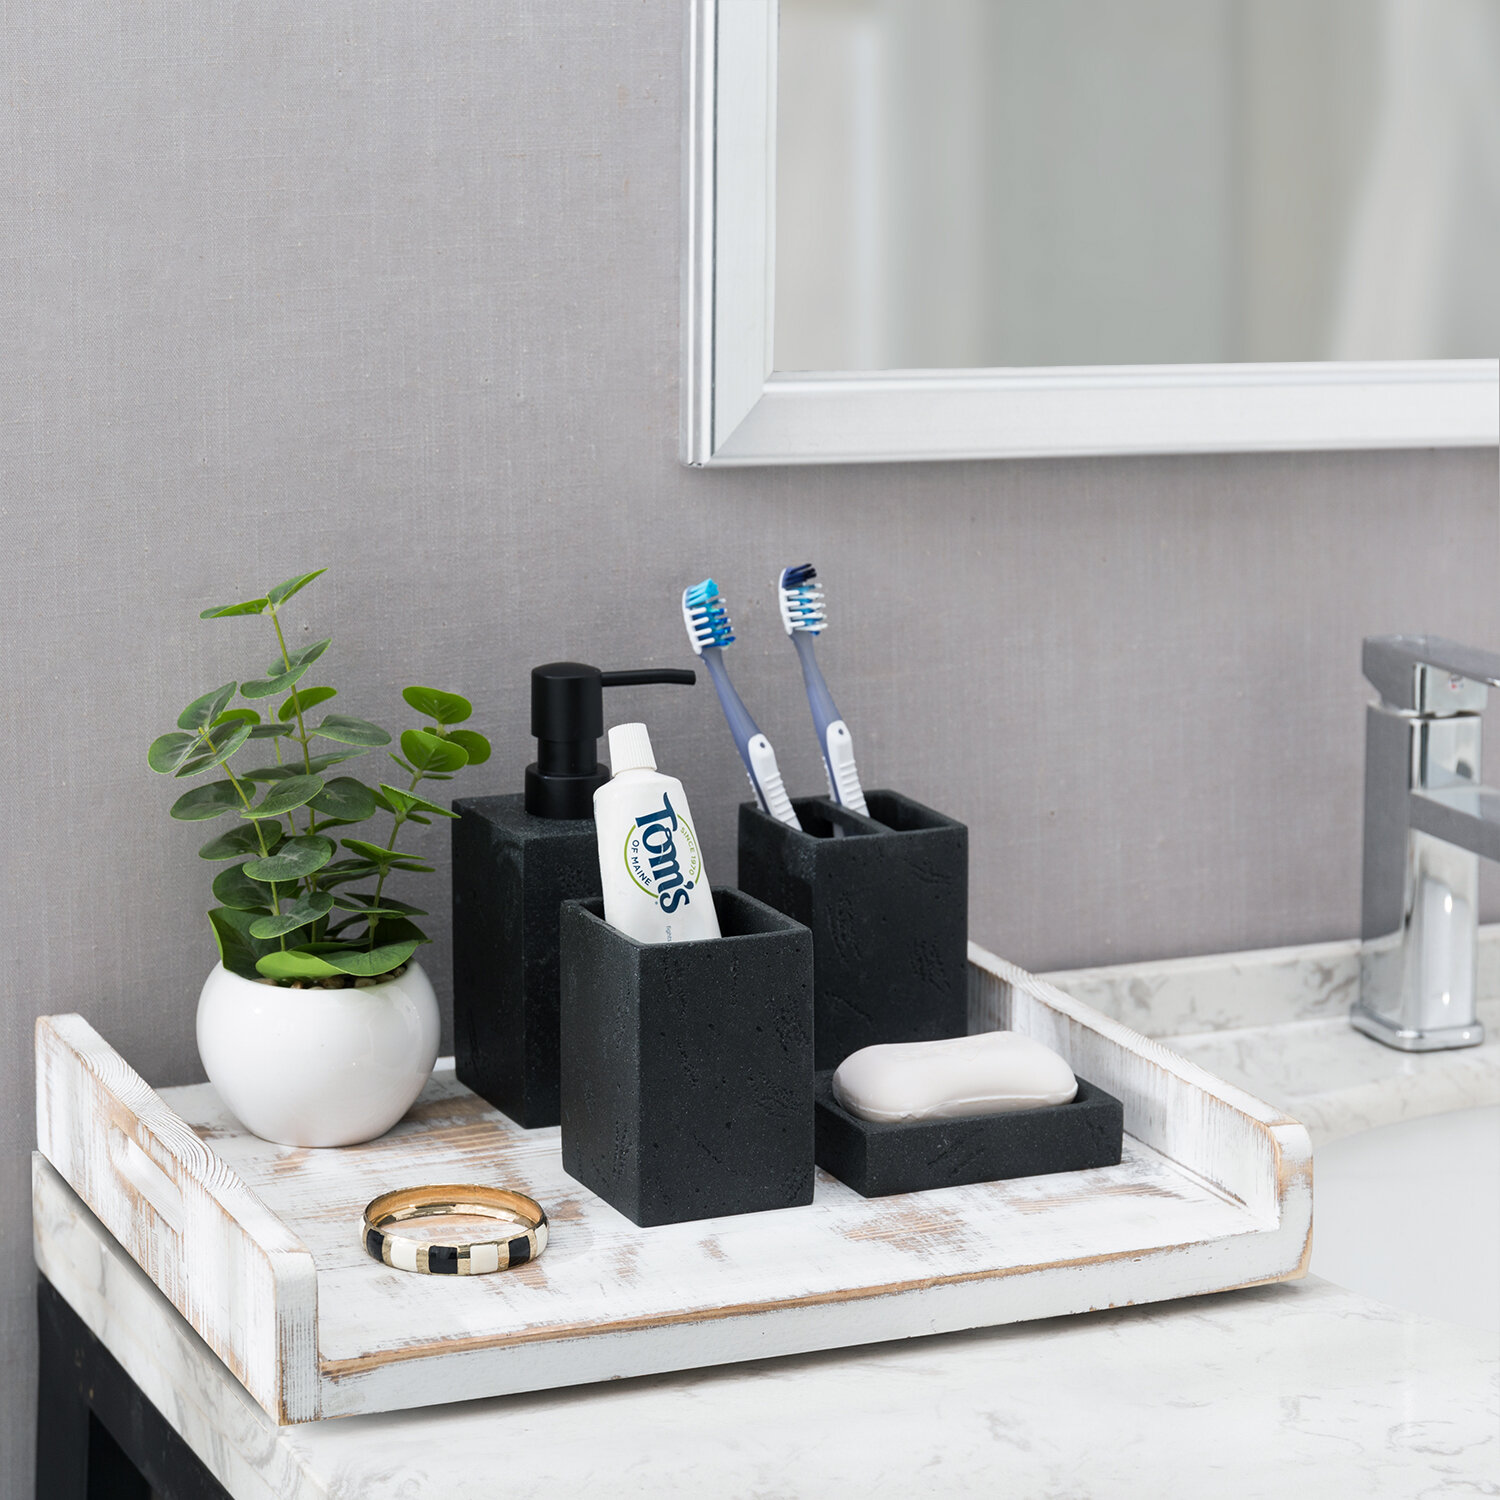 4-Piece Bathroom Accessory Set with Toothbrush Holder, Vanity Tray, So